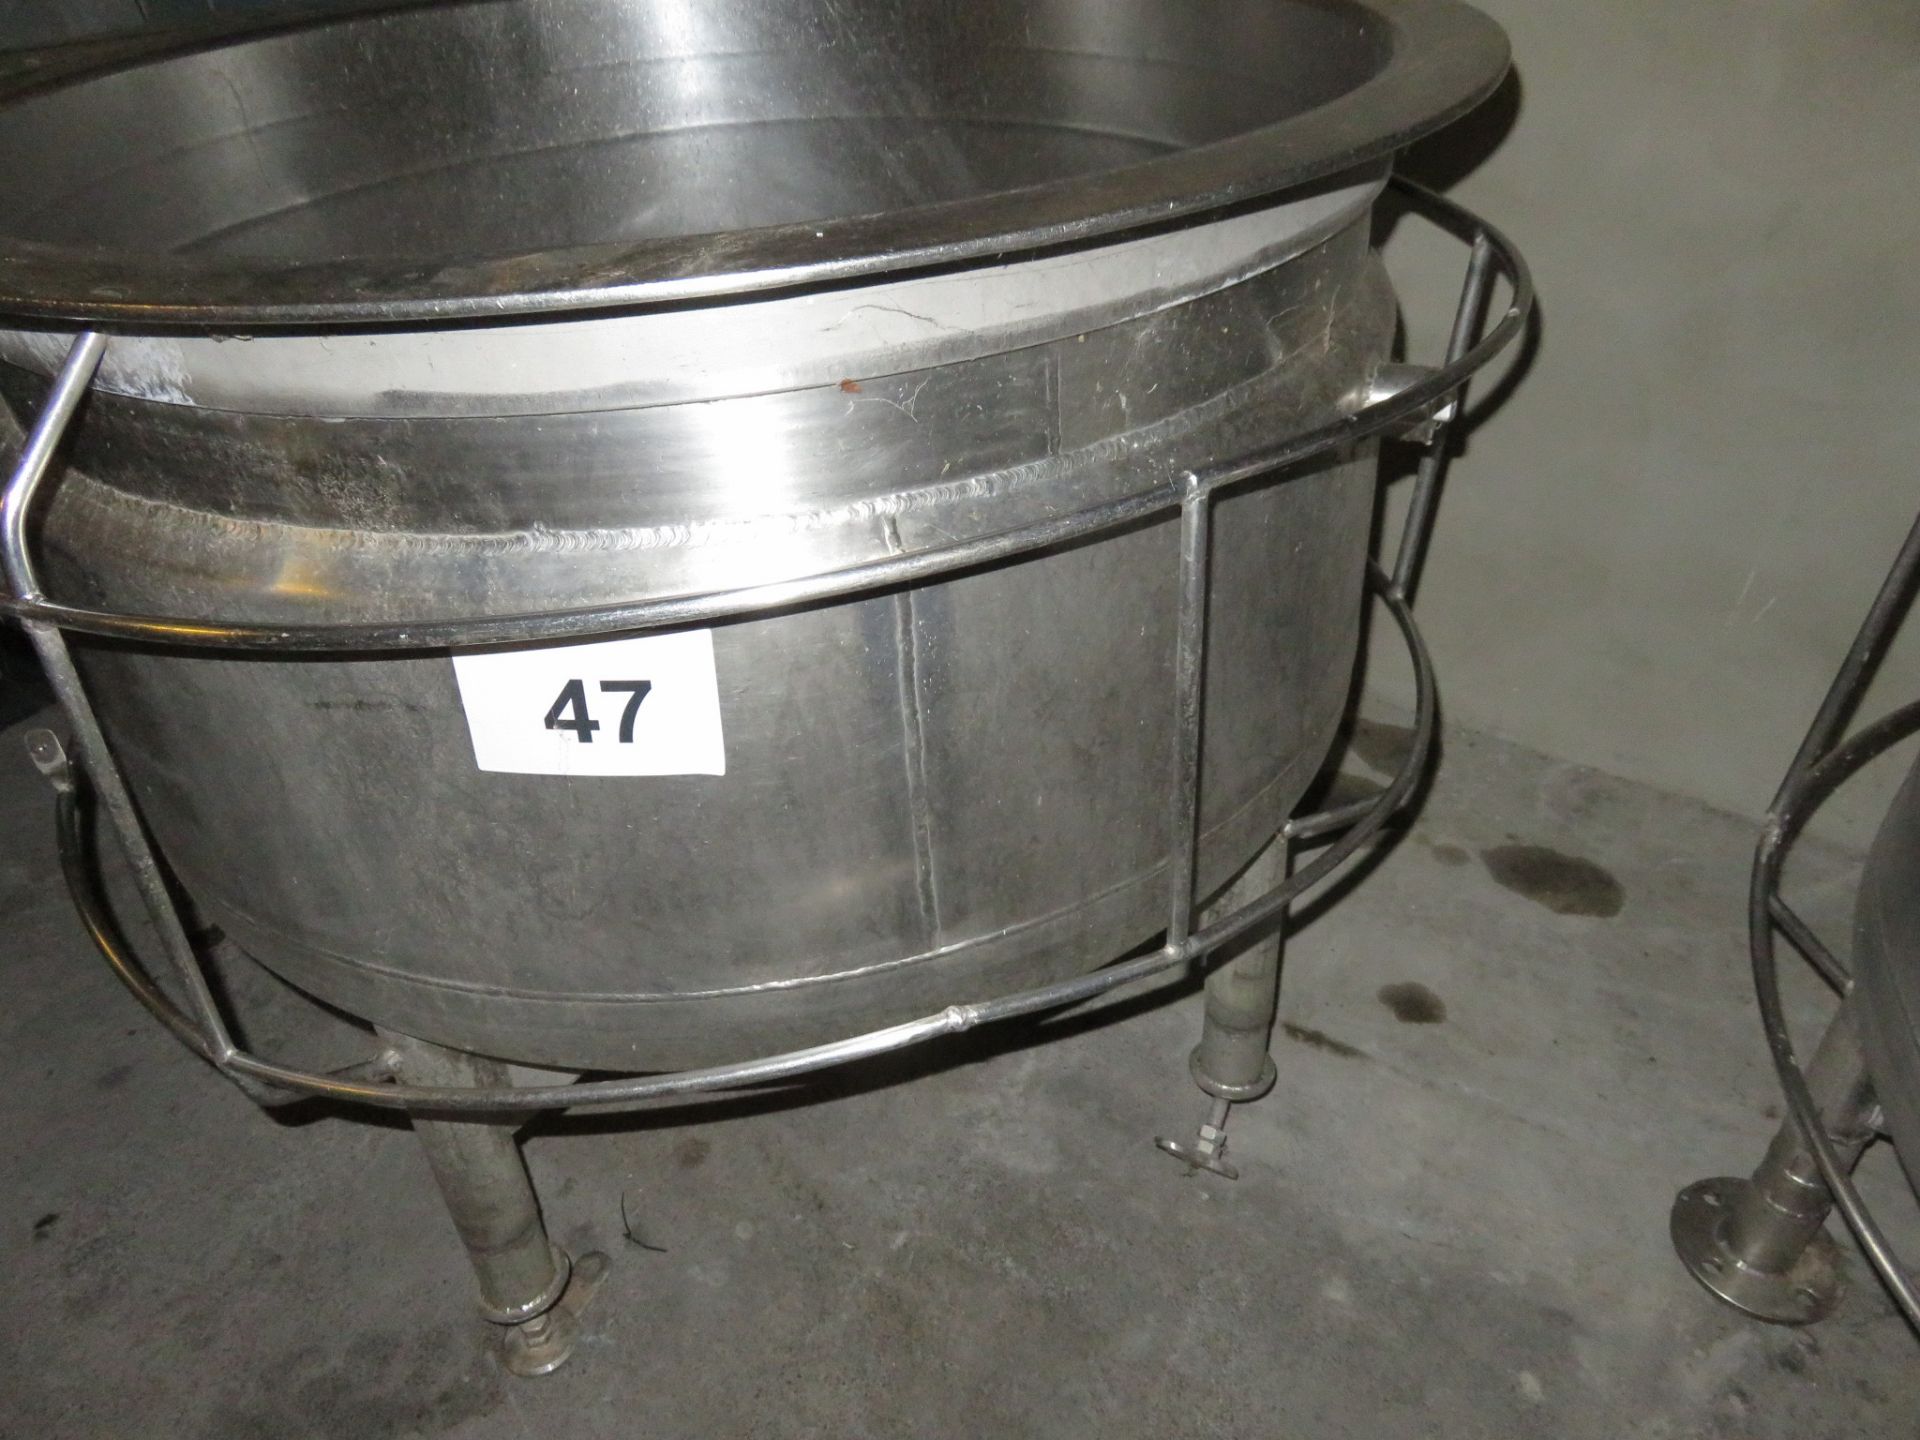 Guisti Jacketed Vessel - Image 4 of 4